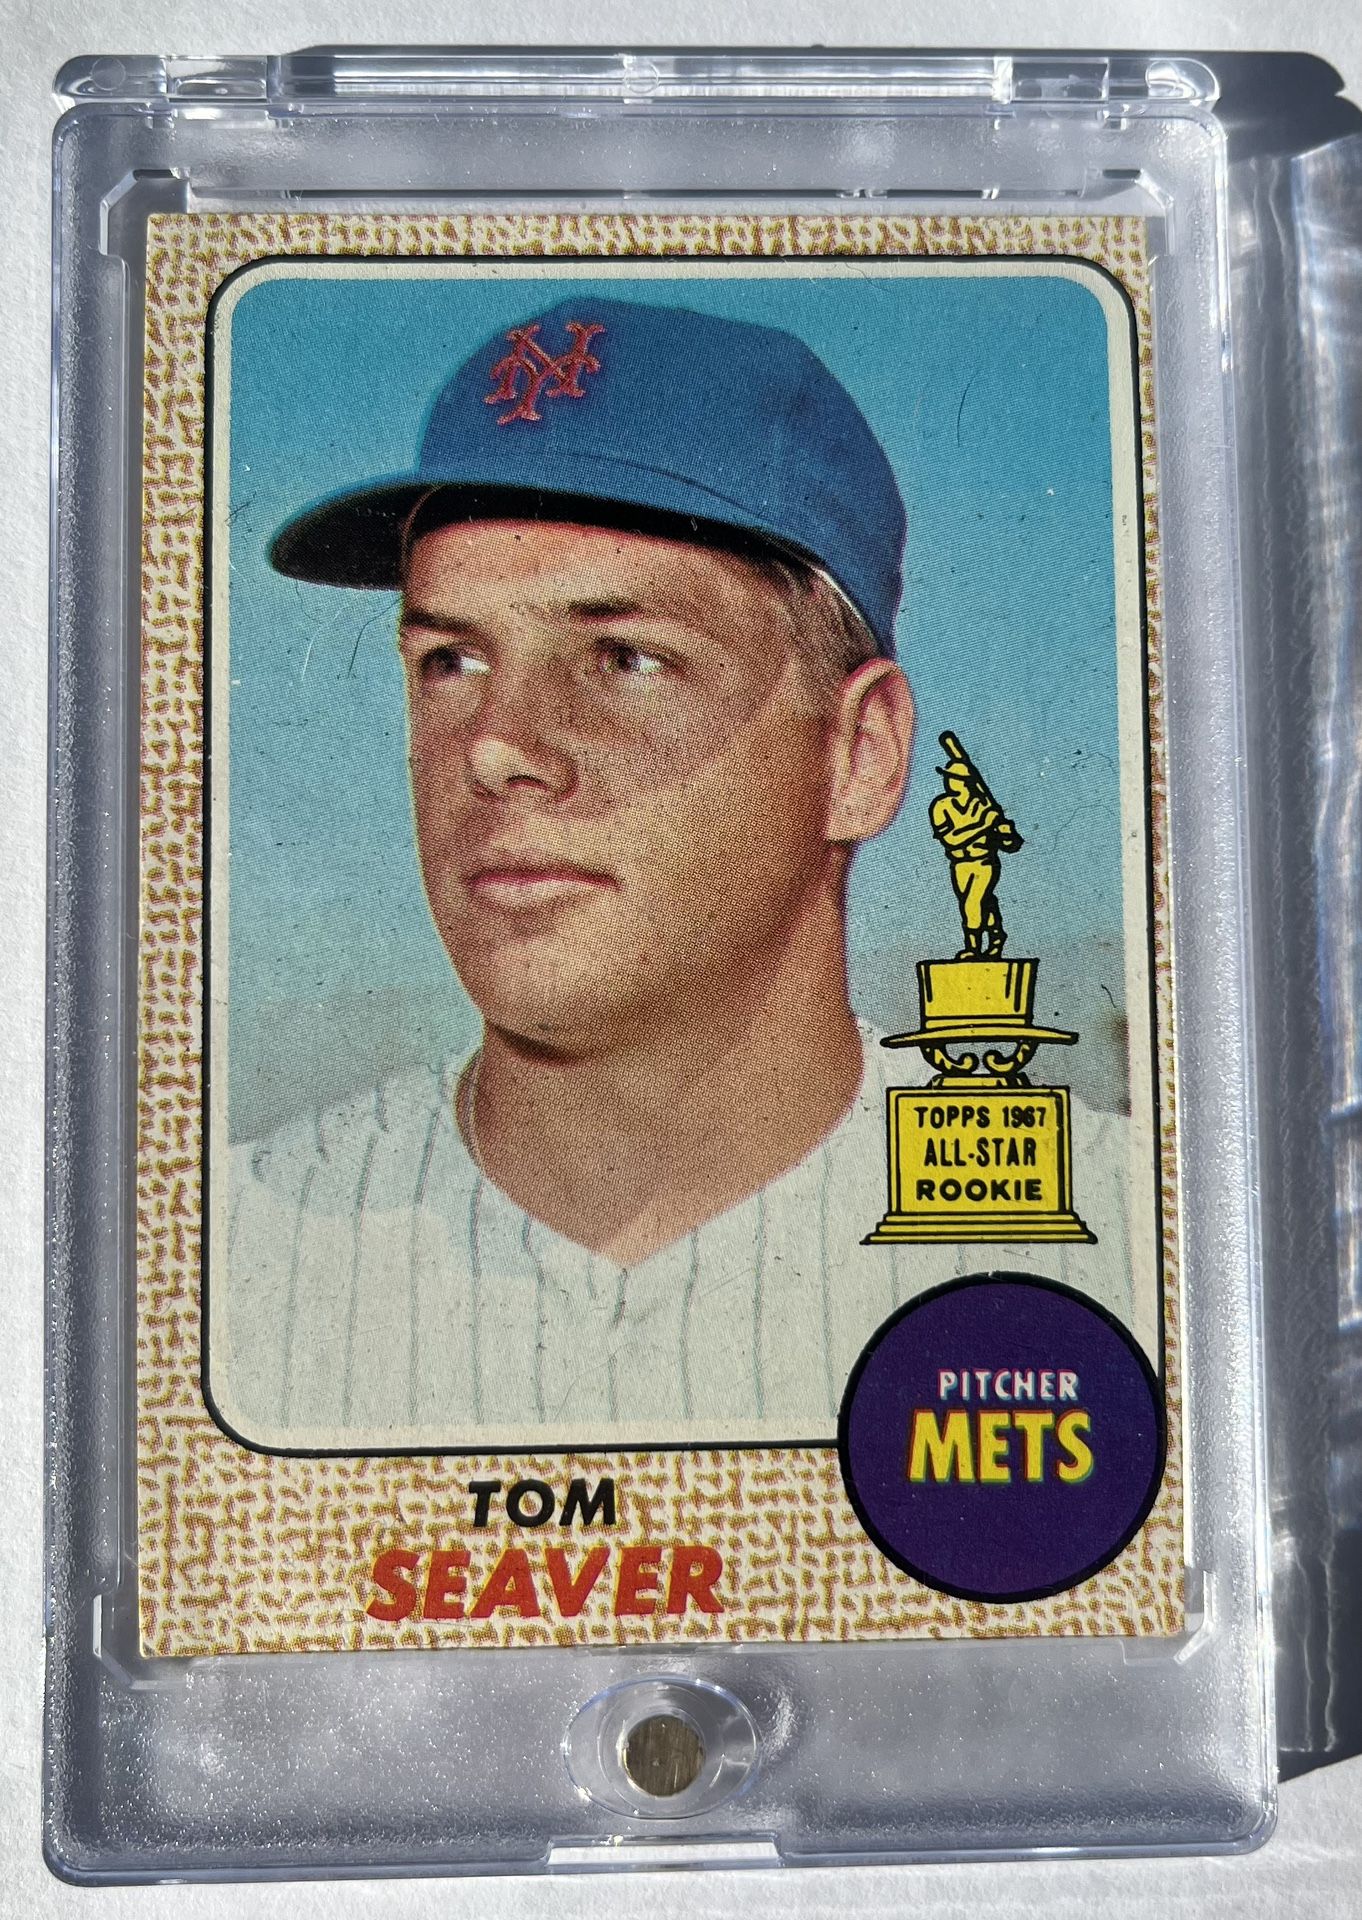 1968 Topps Baseball TOM SEAVER All-Star Rookie #45 VG-VGEX RARE!!  METS Tom Seaver Rookie Card Excellent Condition!!